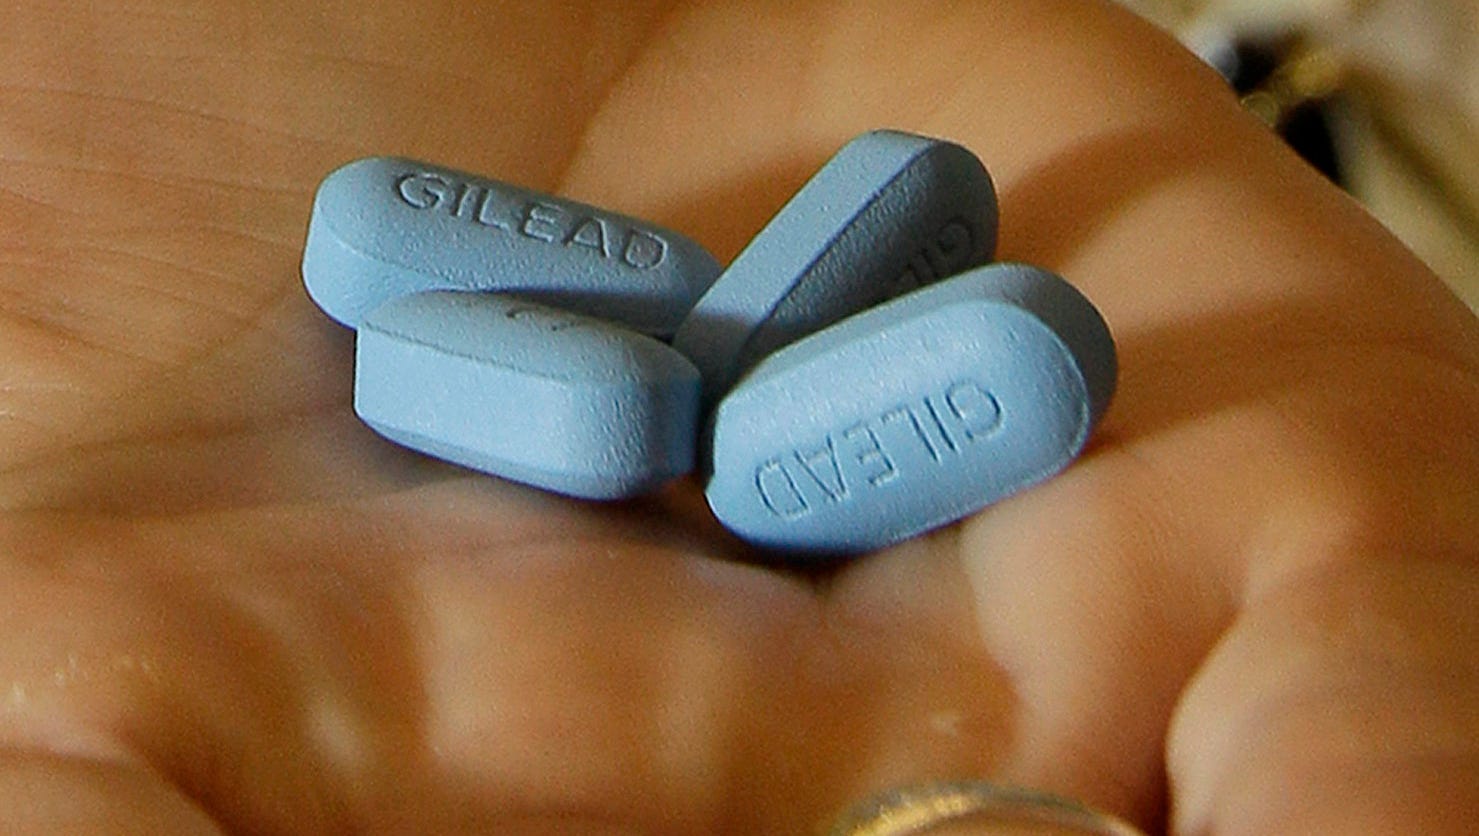 A Daily Pill Can Prevent Hiv Infection But Few Take It 9436